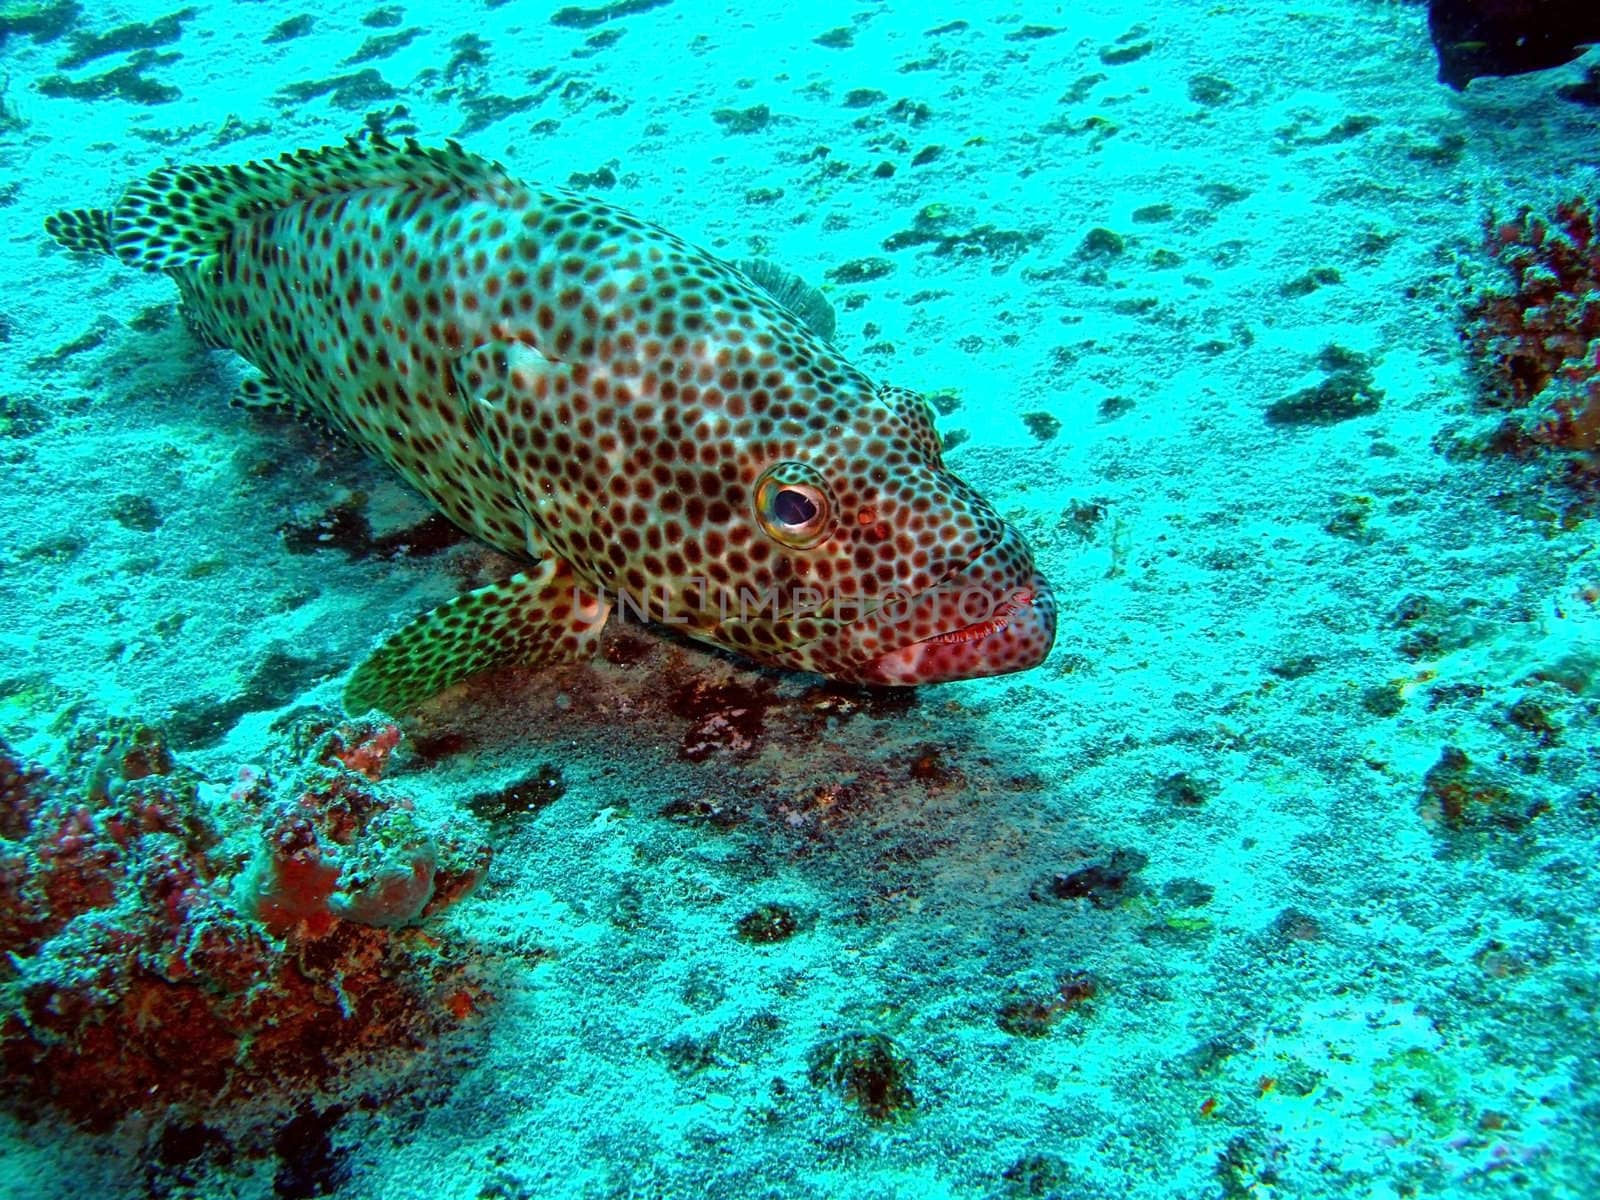 Greasy Grouper by ChrisAlleaume